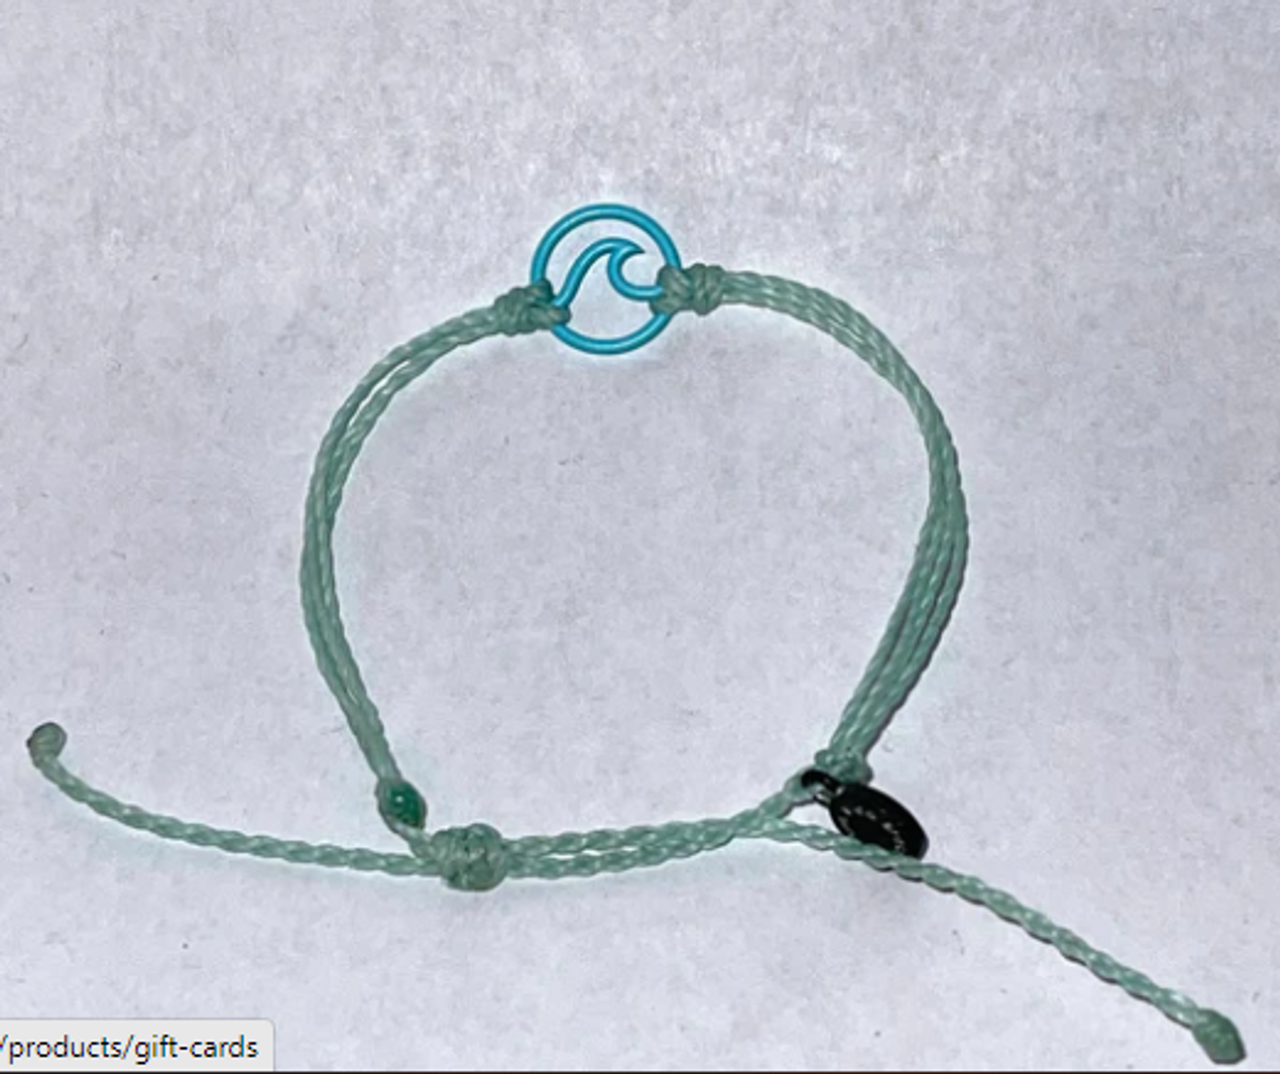 His and Hers Stack - Boyfriend and Girlfriend Gifts – Aqua Pura Bracelets